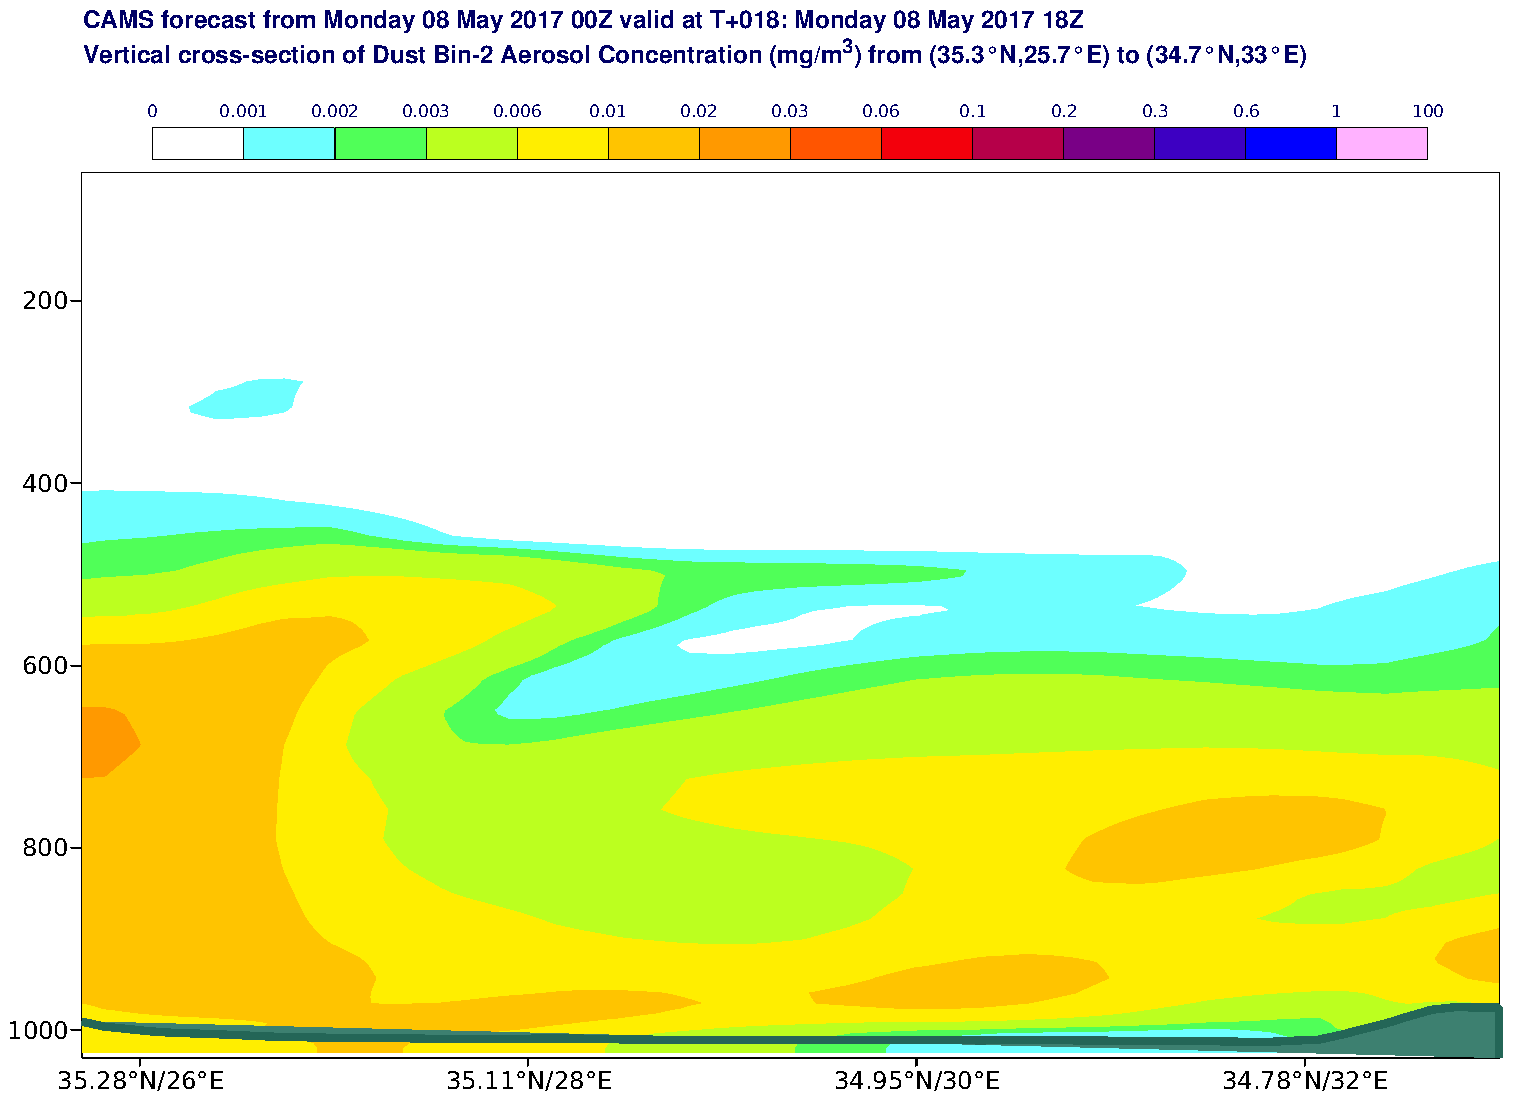 Vertical cross-section of Dust Bin-2 Aerosol Concentration (mg/m3) valid at T18 - 2017-05-08 18:00